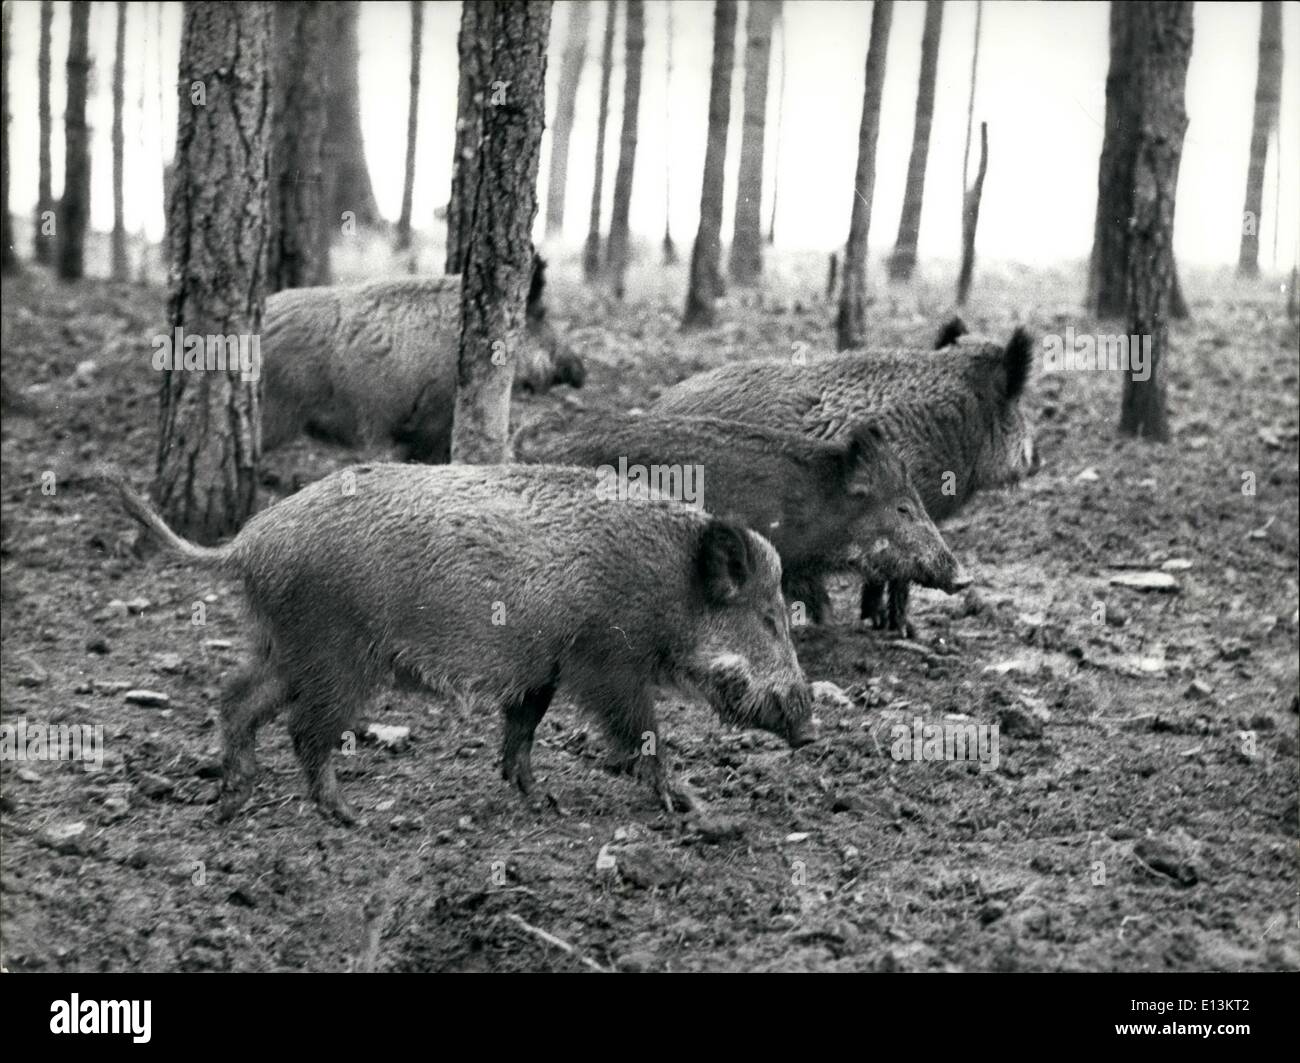 Mar. 02, 2012 - Wild animals roam in natural surroundings in Park 135 miles from Paris - Wild animals of various species at the Stock Photo